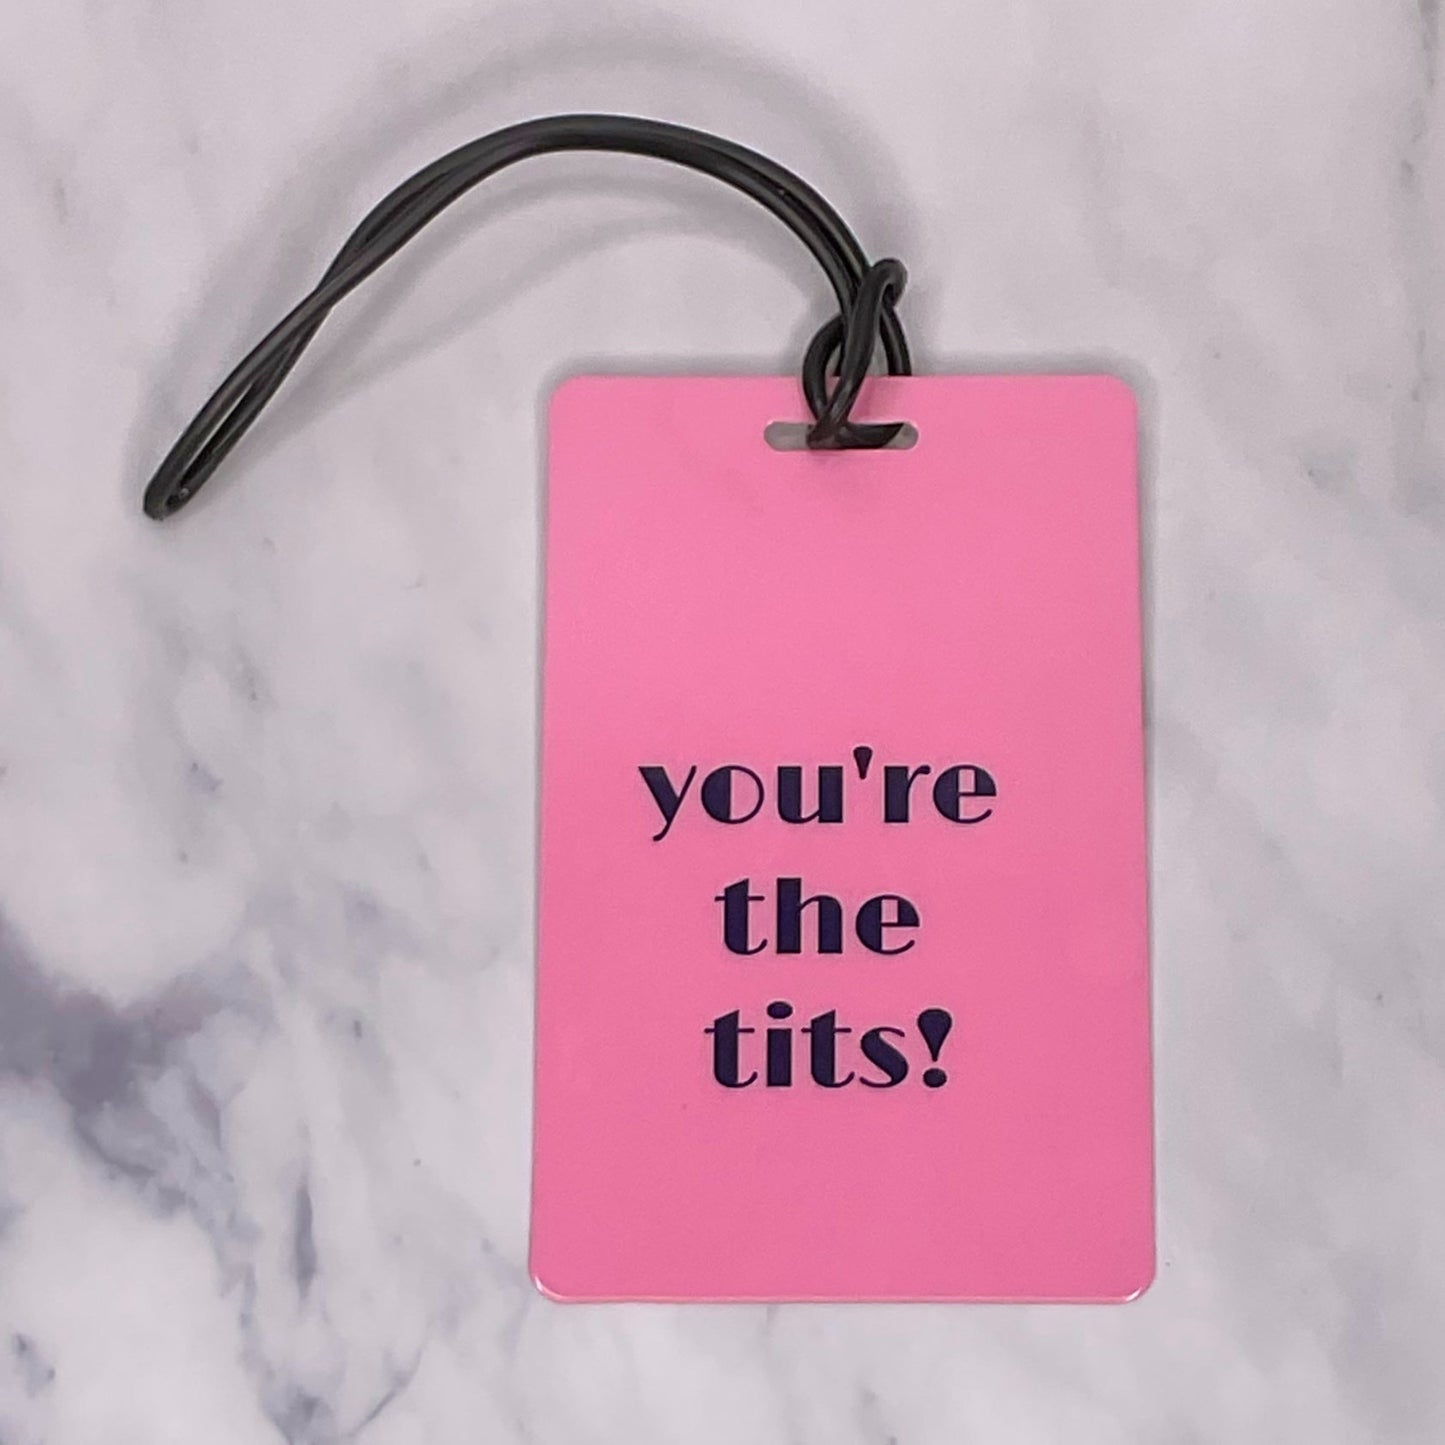 you’re the tits luggage tag